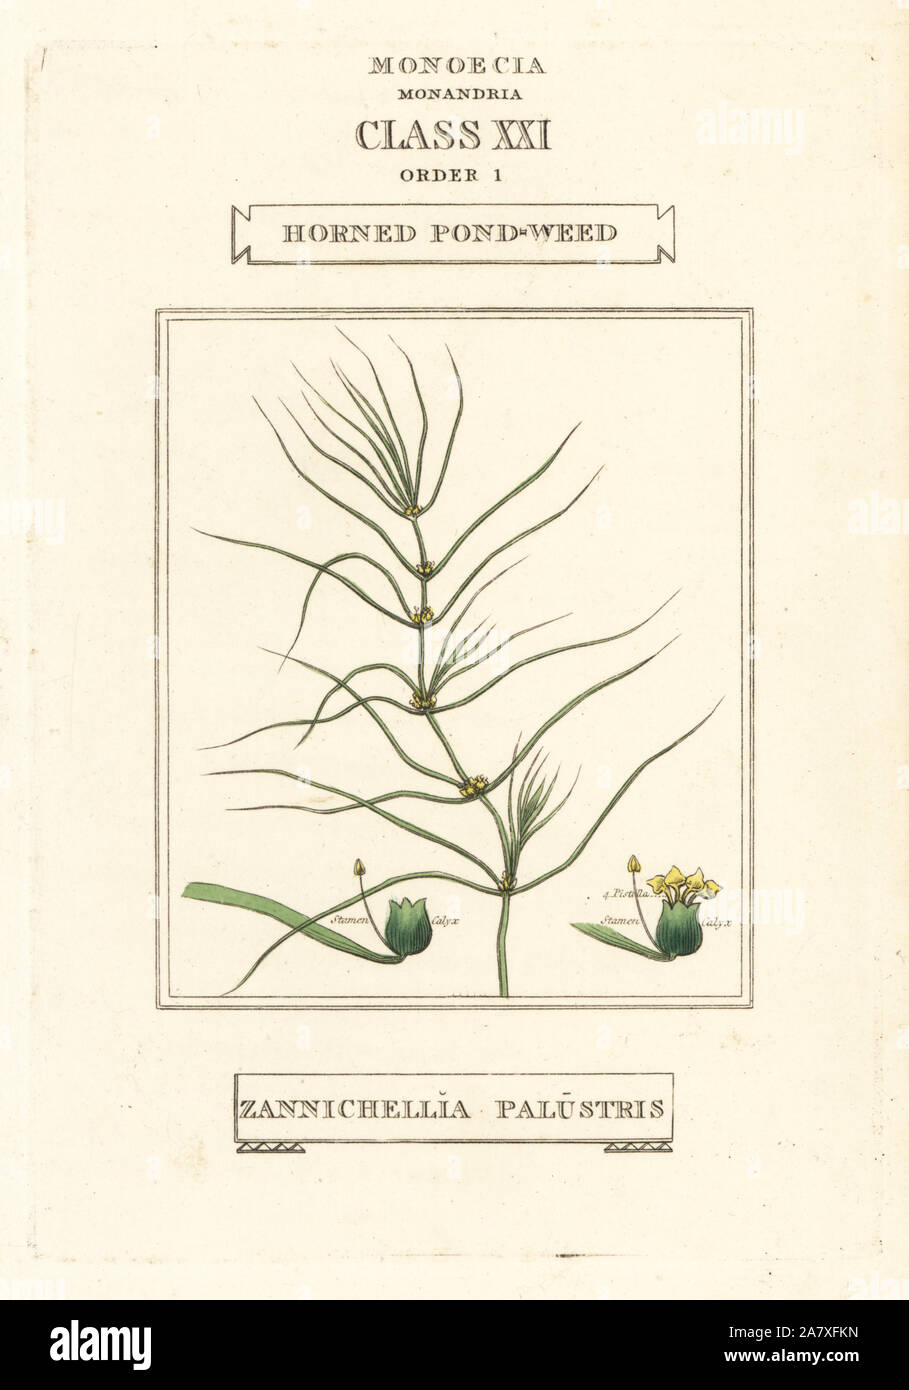 Horned pondweed, Zannichellia palustris. Handcoloured copperplate engraving after an illustration by Richard Duppa from his The Classes and Orders of the Linnaean System of Botany, Longman, Hurst, London, 1816. Stock Photo